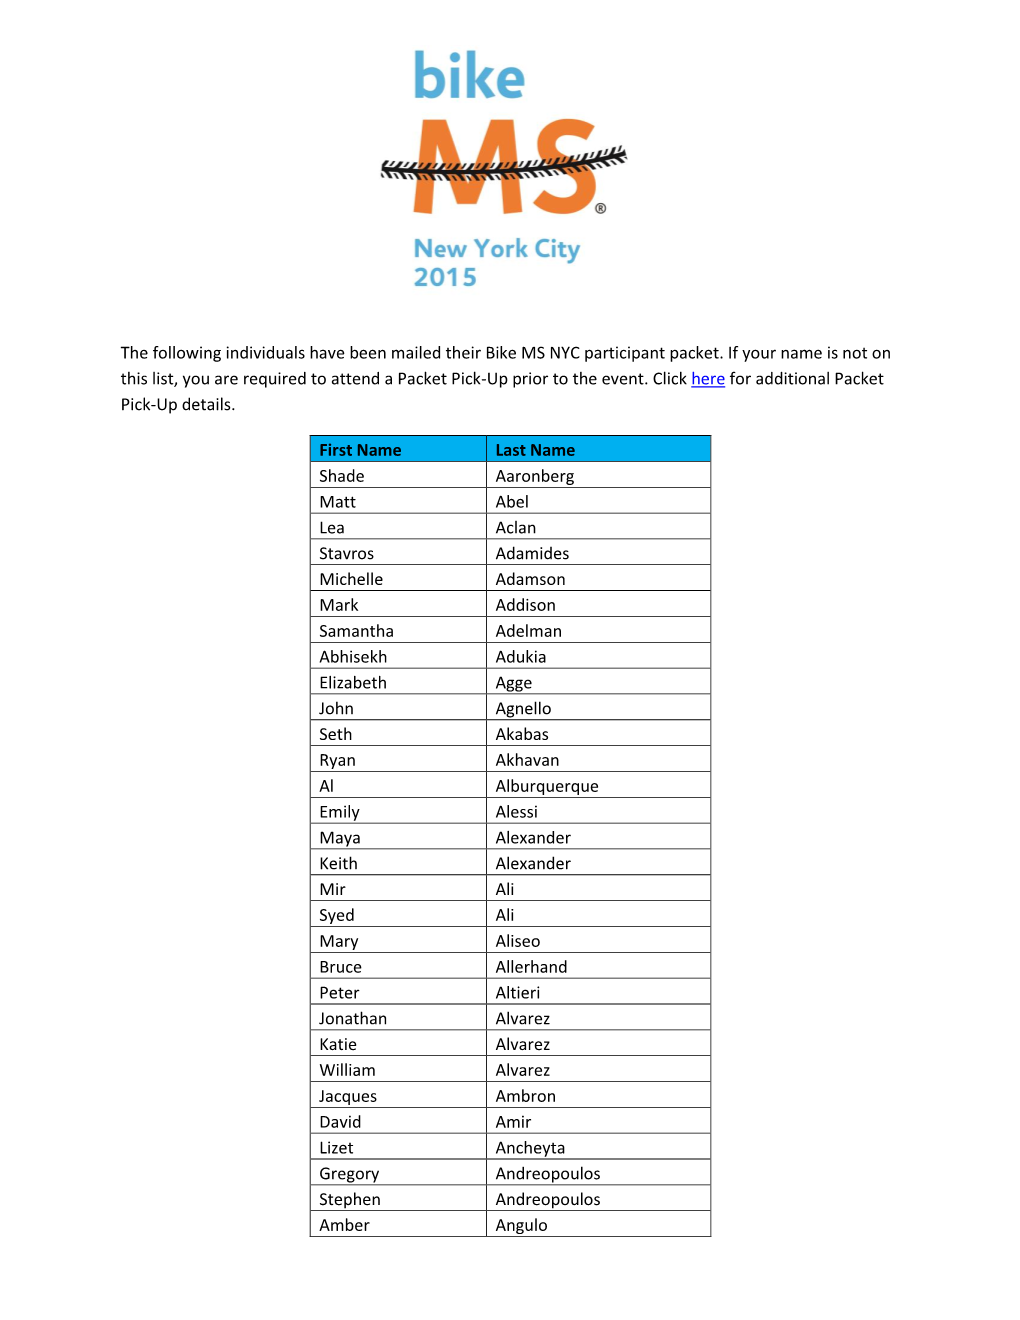 The Following Individuals Have Been Mailed Their Bike MS NYC Participant Packet. If Your Name Is Not on This List, You Are Requi